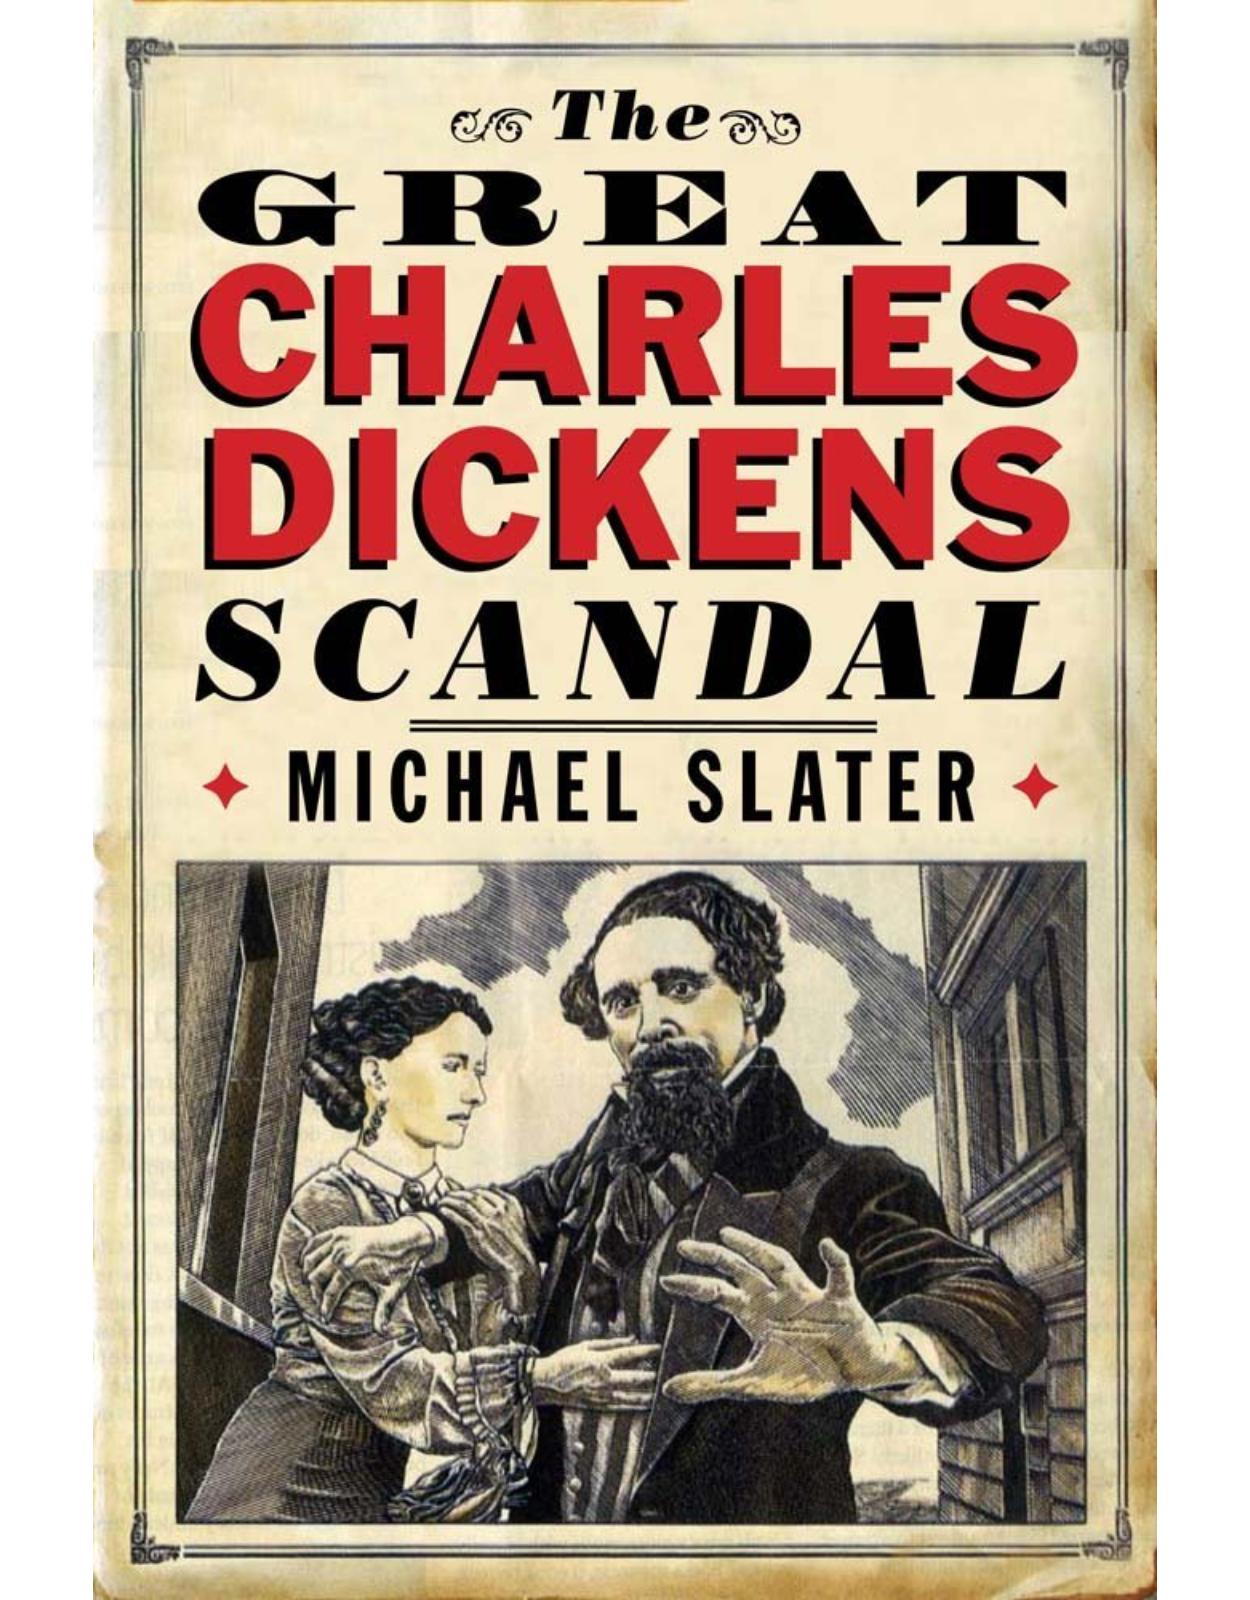 Great Charles Dickens Scandal.